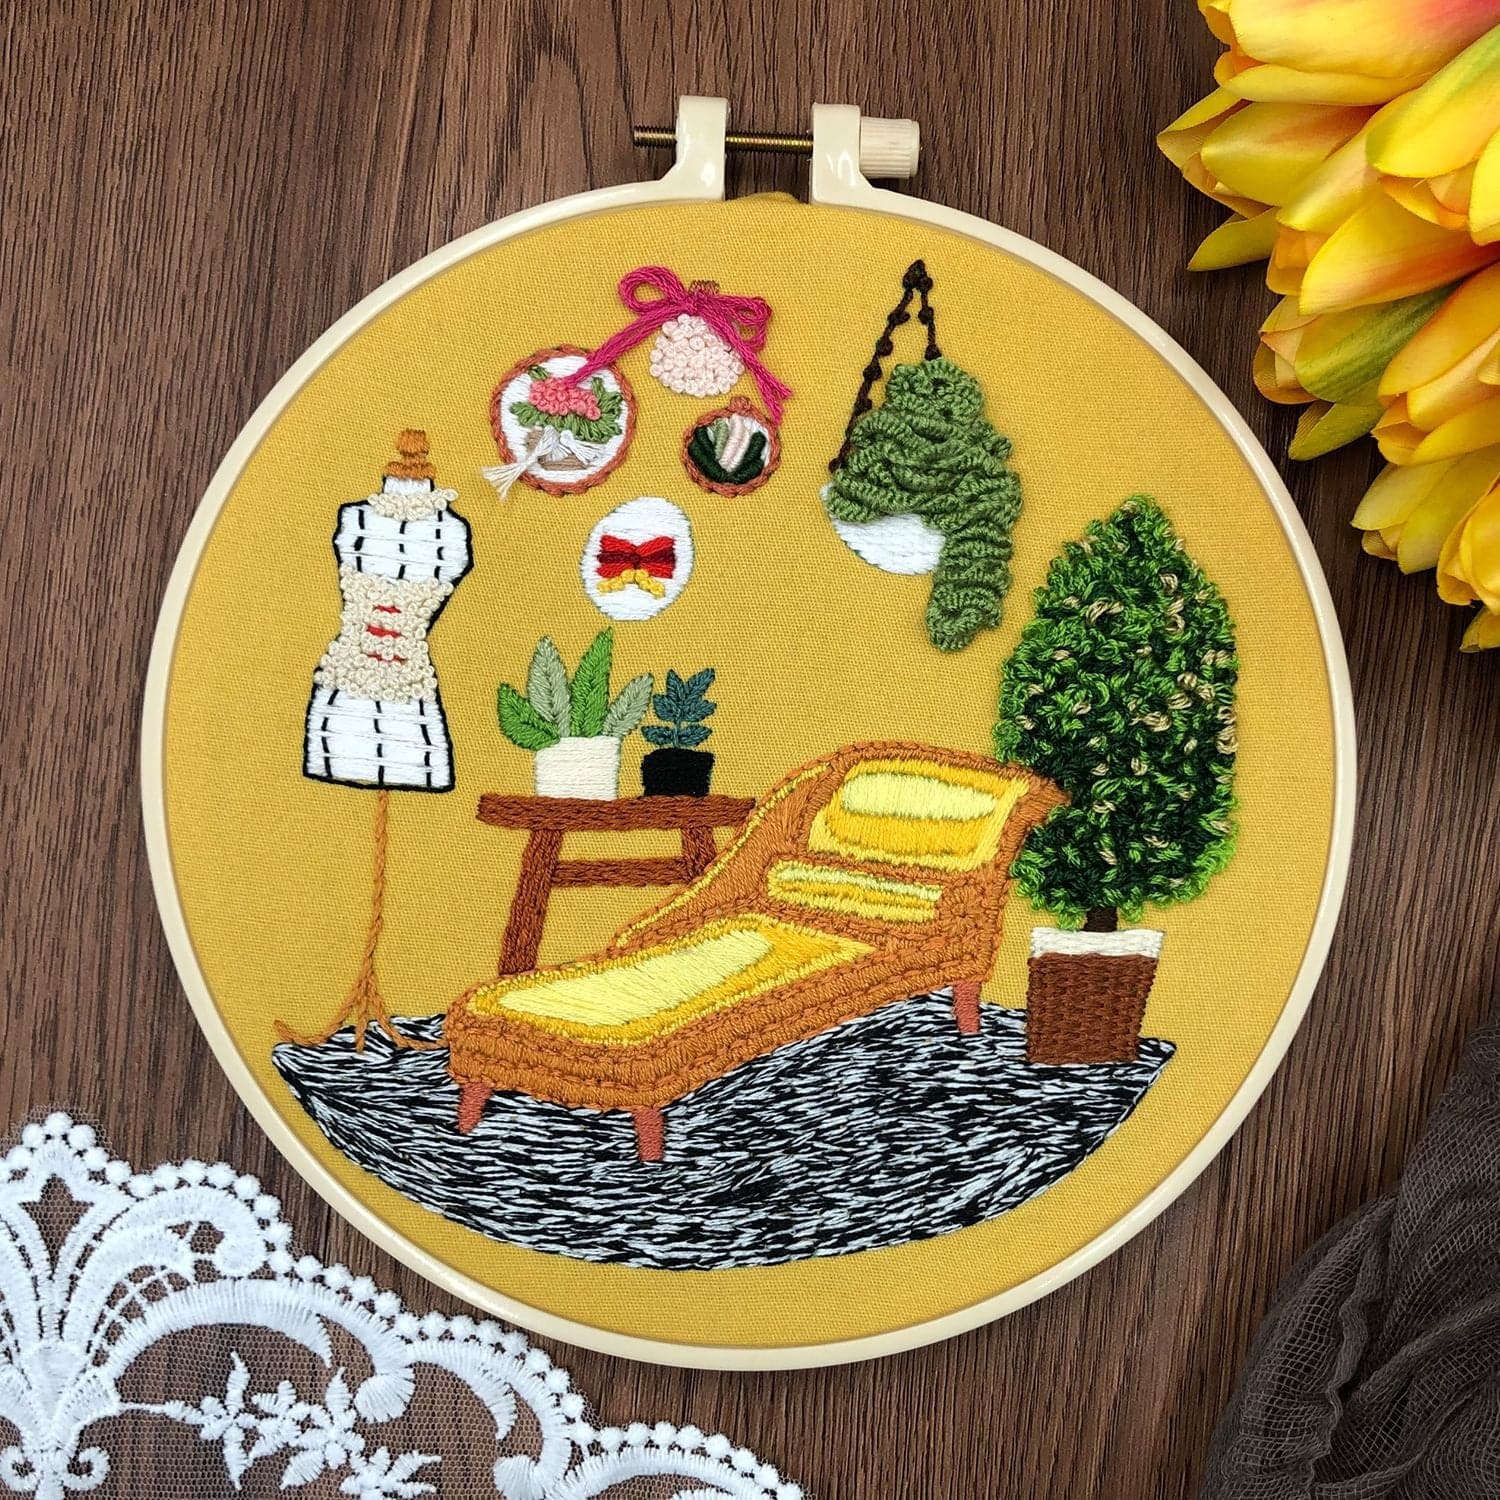 "A corner of the family" - Embroidery ktclubs.com